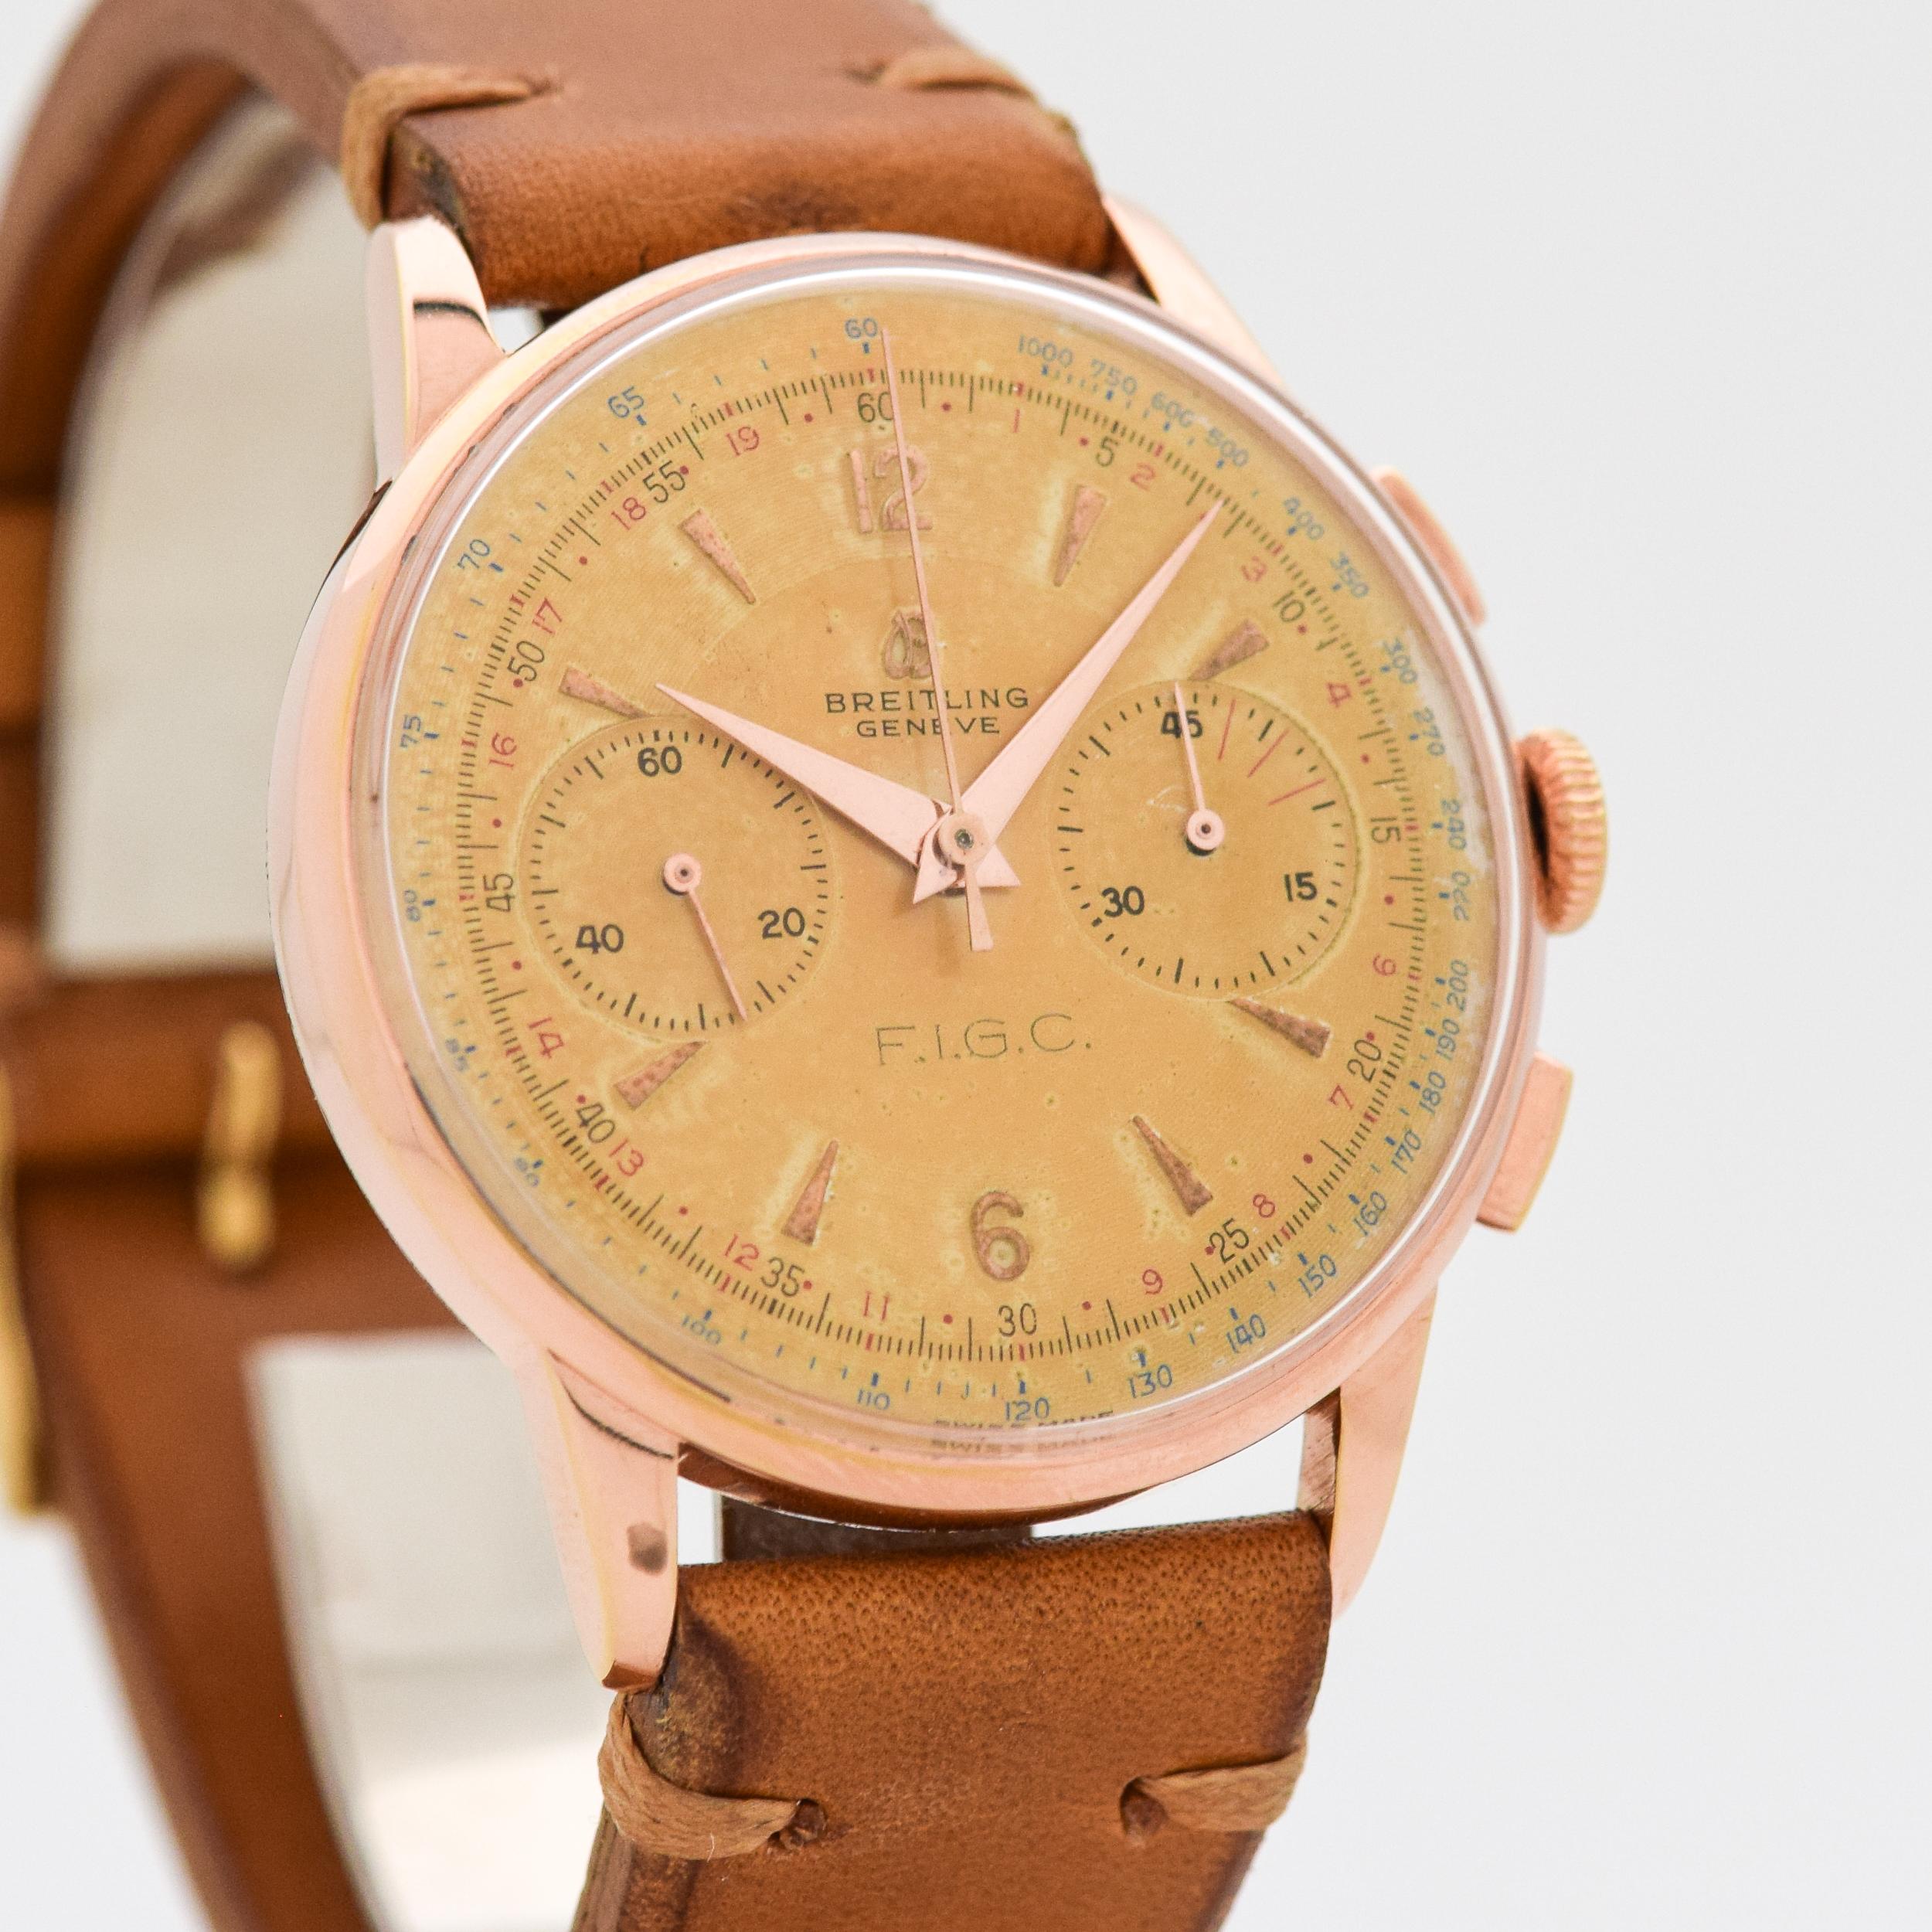 1956 Vintage Breitling 2 Register Chronograph RARE Ref. 1194 Rose Gold Plated Case with Stainless Steel Case Back watch with 'F.I.G.A.' (Italian Soccer/Football (Federazione Italiana Giuoco Calcio) with Original Champagne Color Dial with Applied